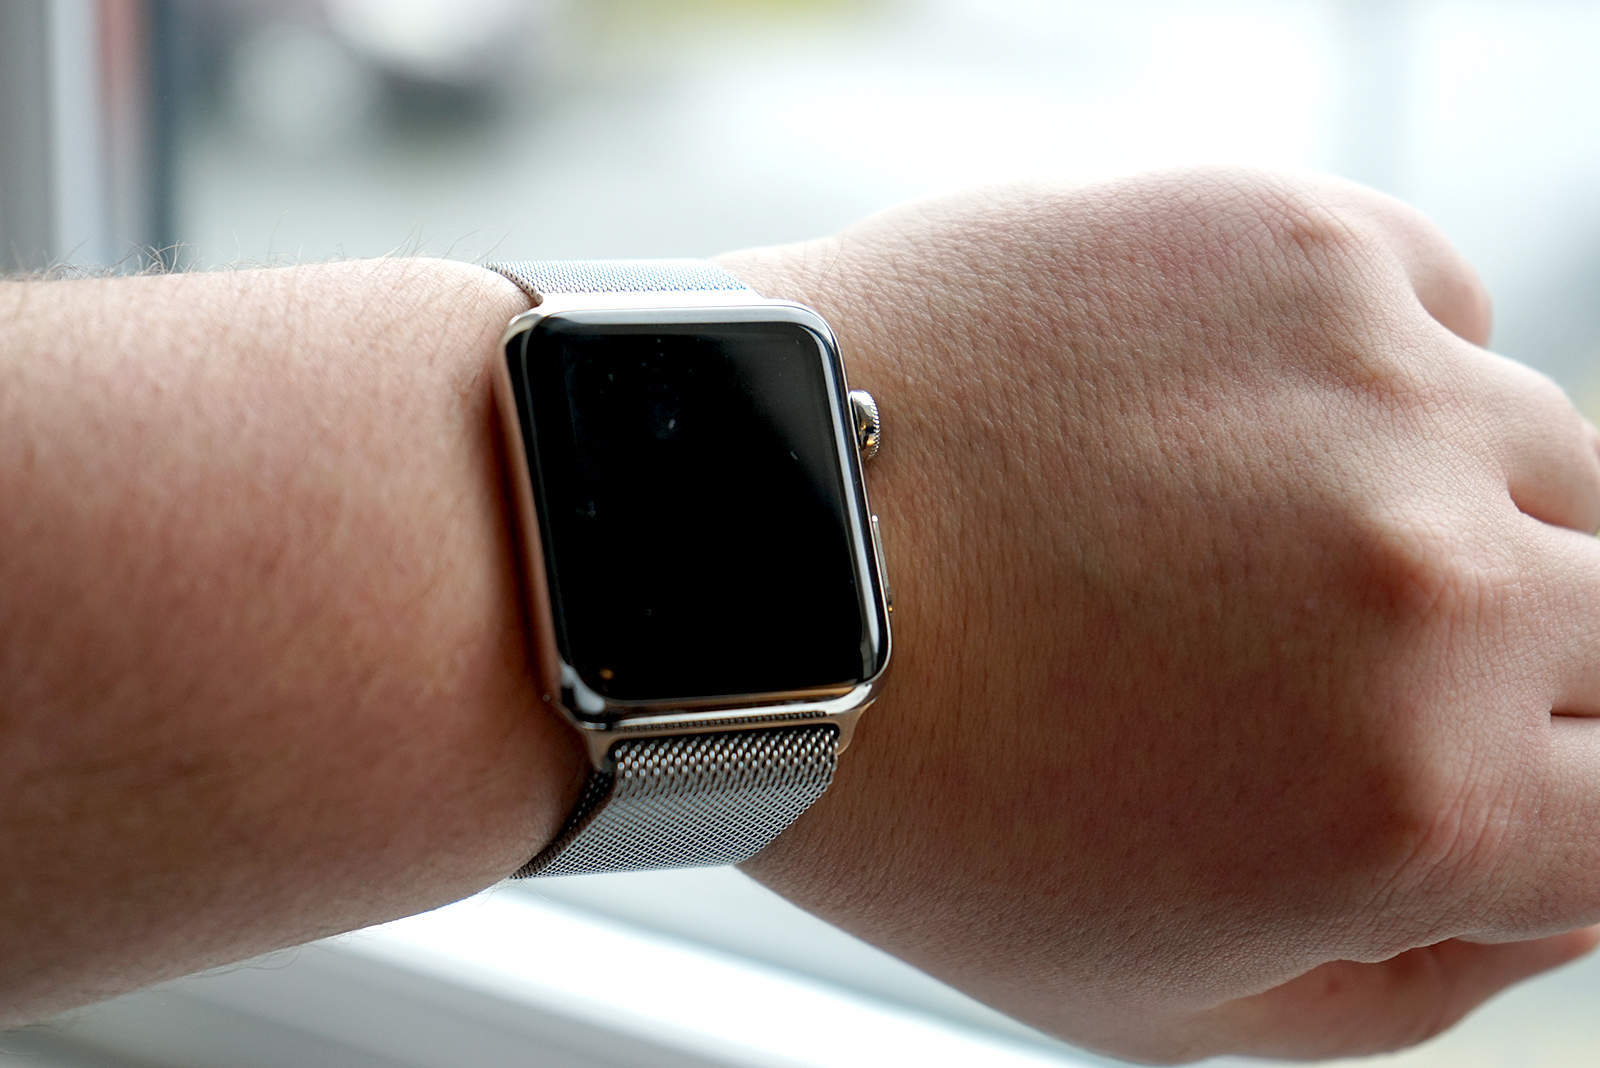 Watch out Apple Watch, Google is coming for you.